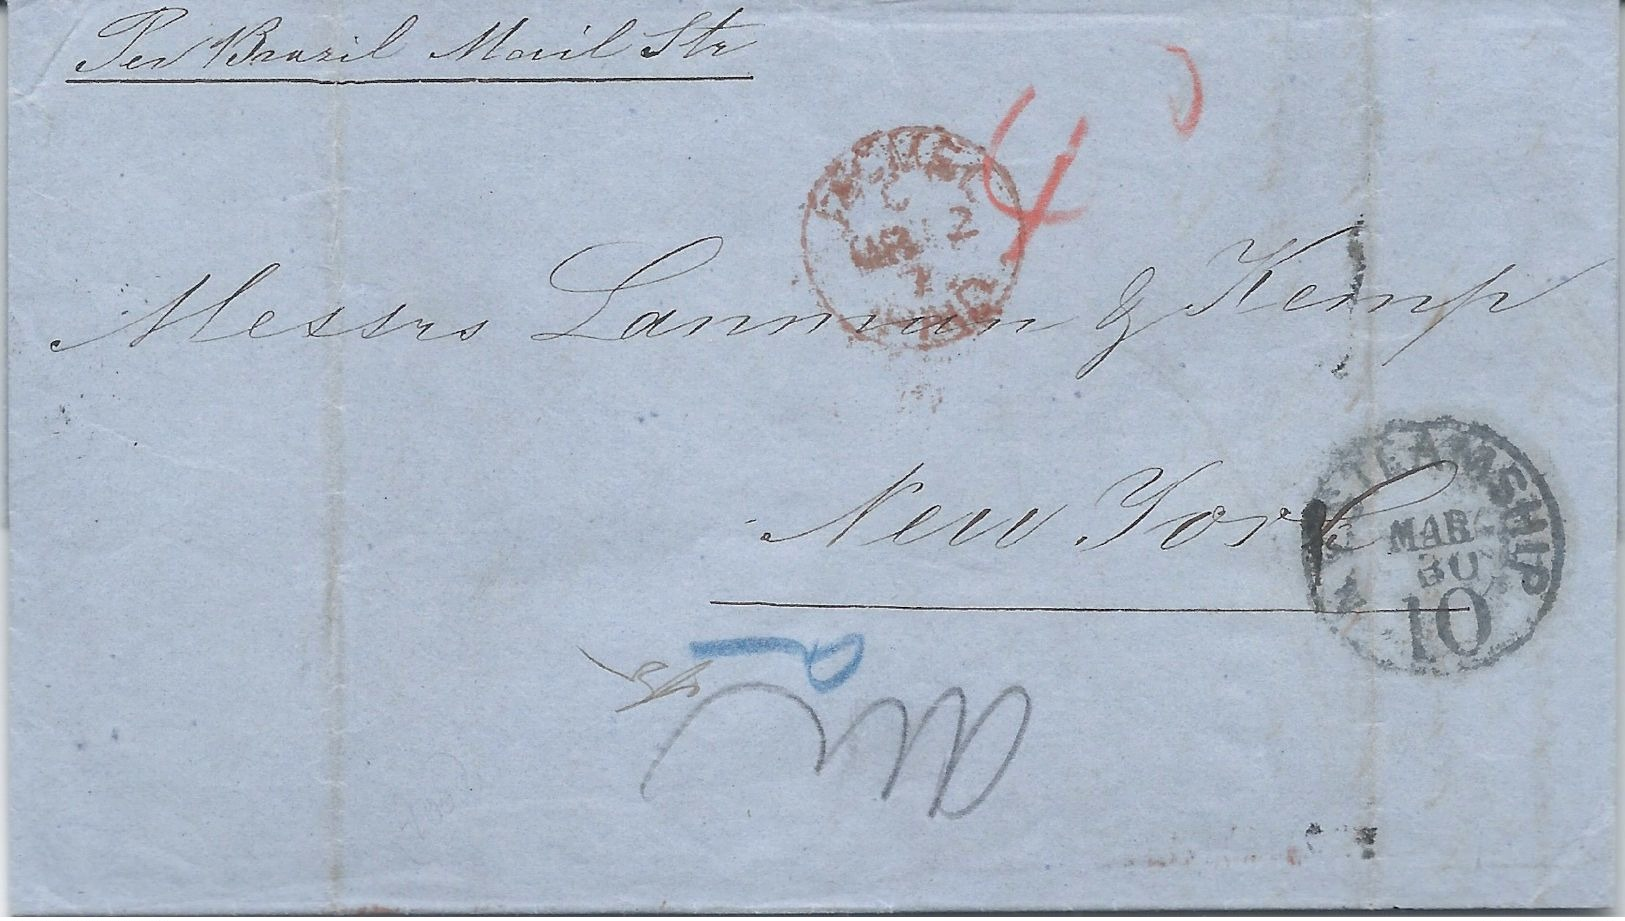 Haiti, 1871 Stampless Cover With Letter, Sent From Jacmel Via St. Thomas, D.W.I., To New York, Rare Postal Markings, VF - Danish West Indies